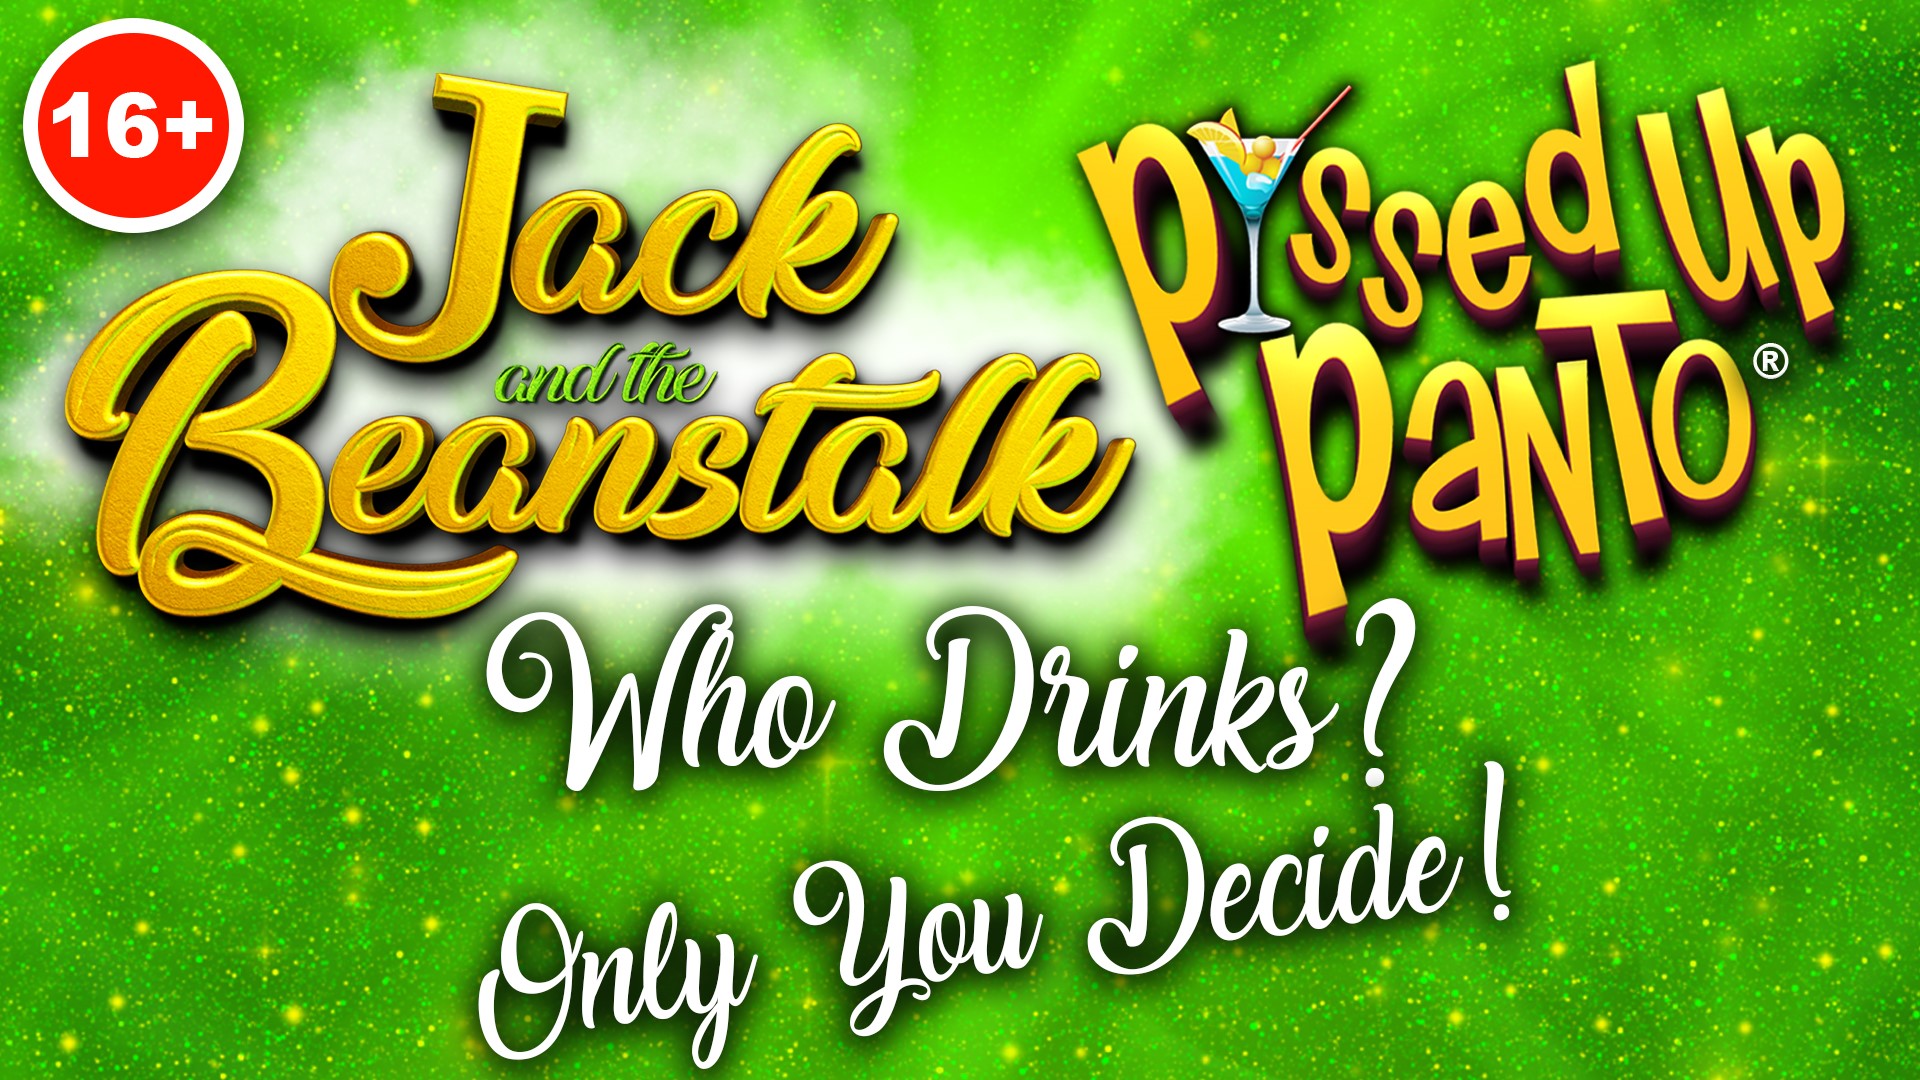 Jack &#038; The Beanstalk &#8211; P*ssed Up Panto